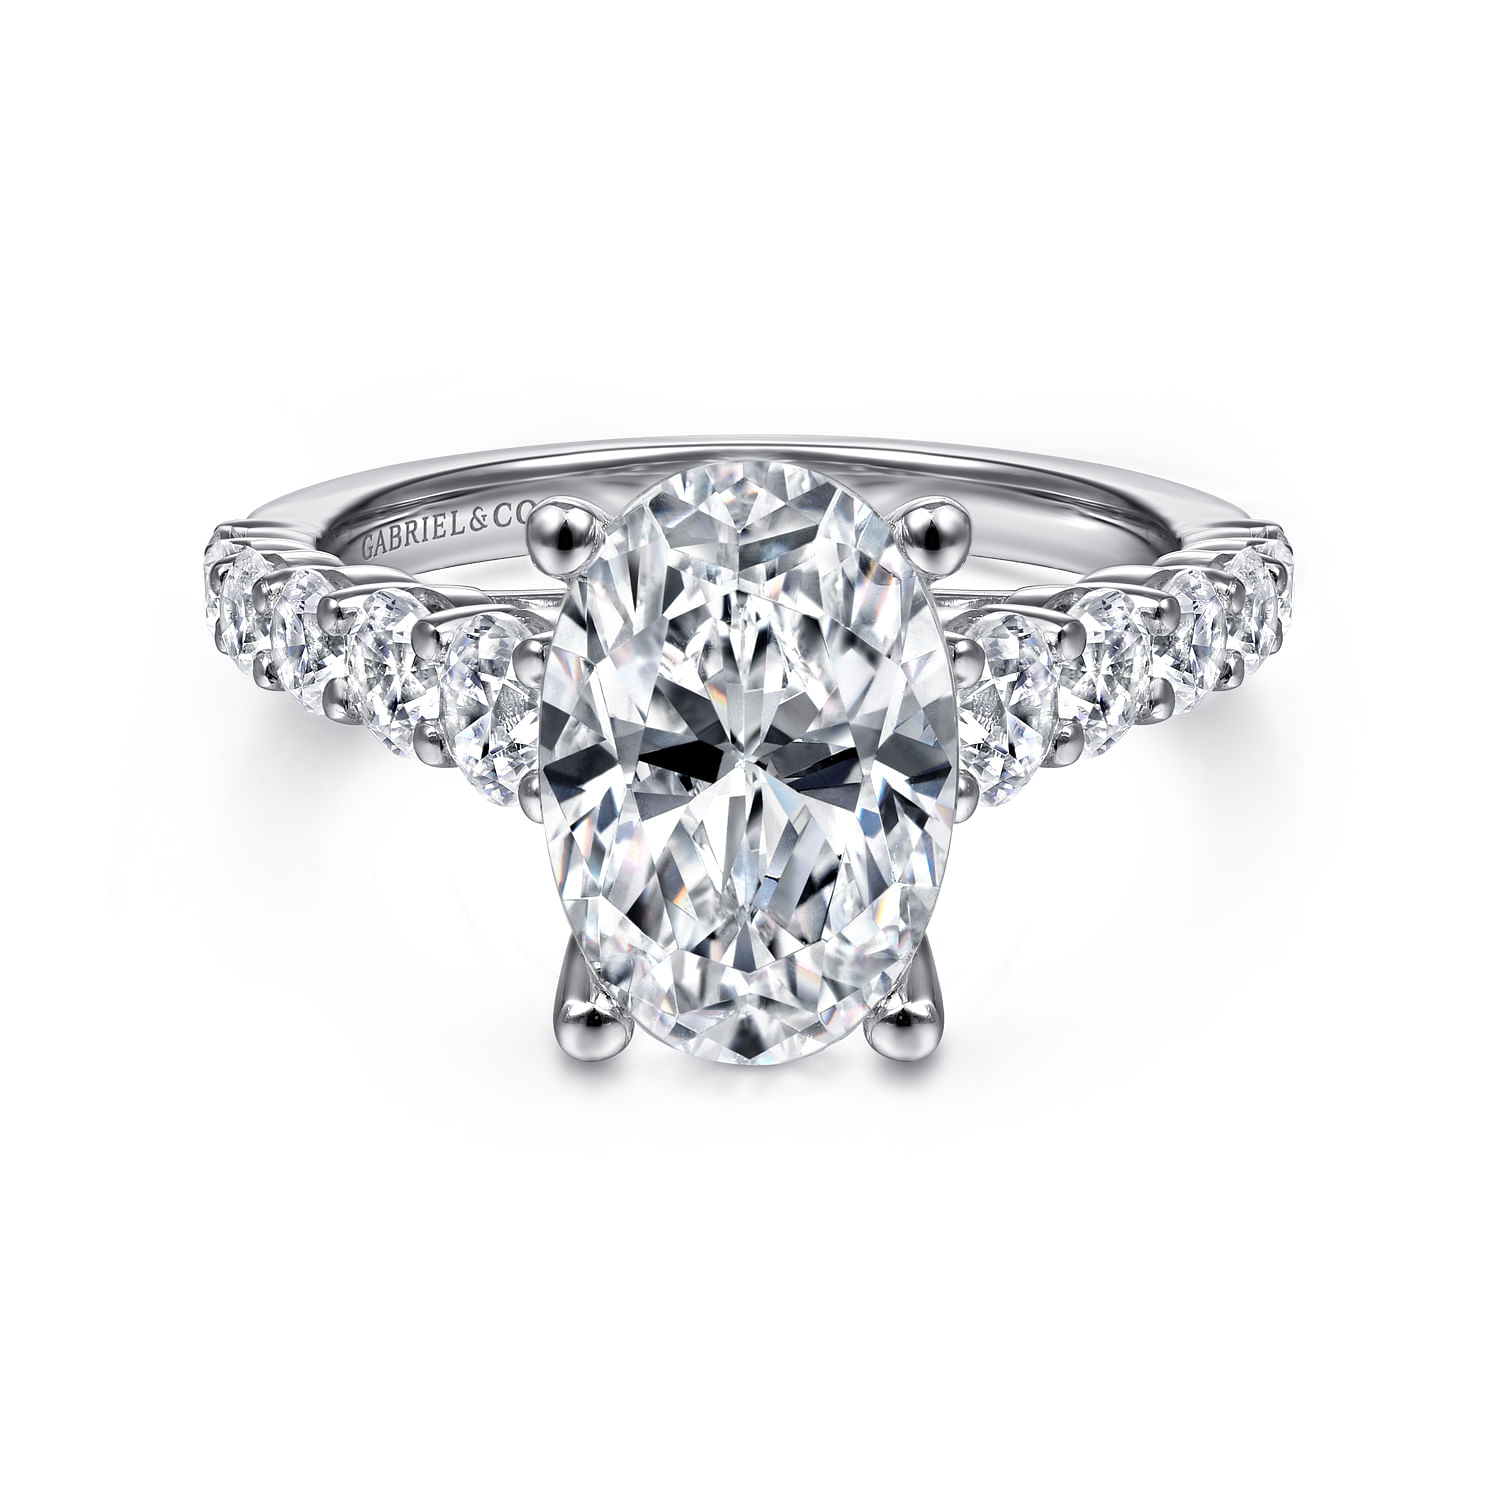 Taylor - 14K White Gold Oval Diamond Engagement Ring